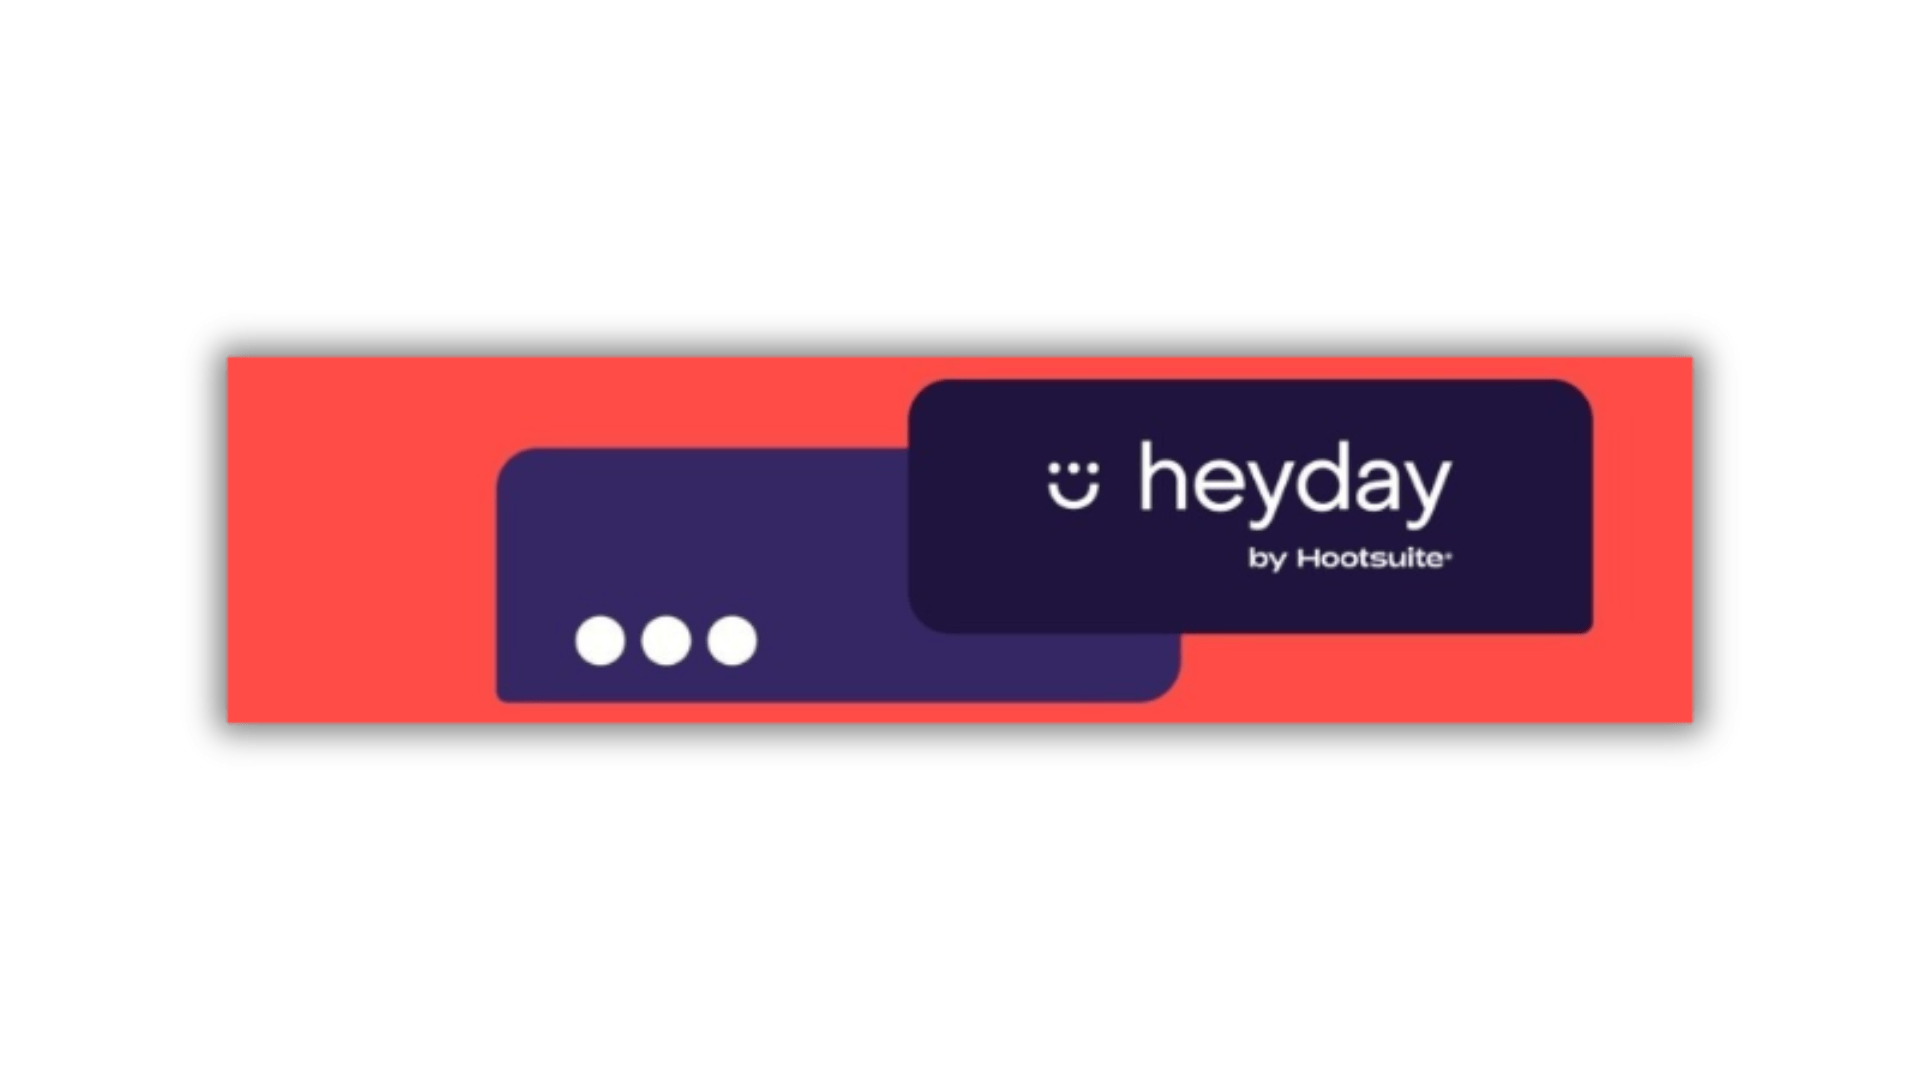 Heyday by Hootsuite